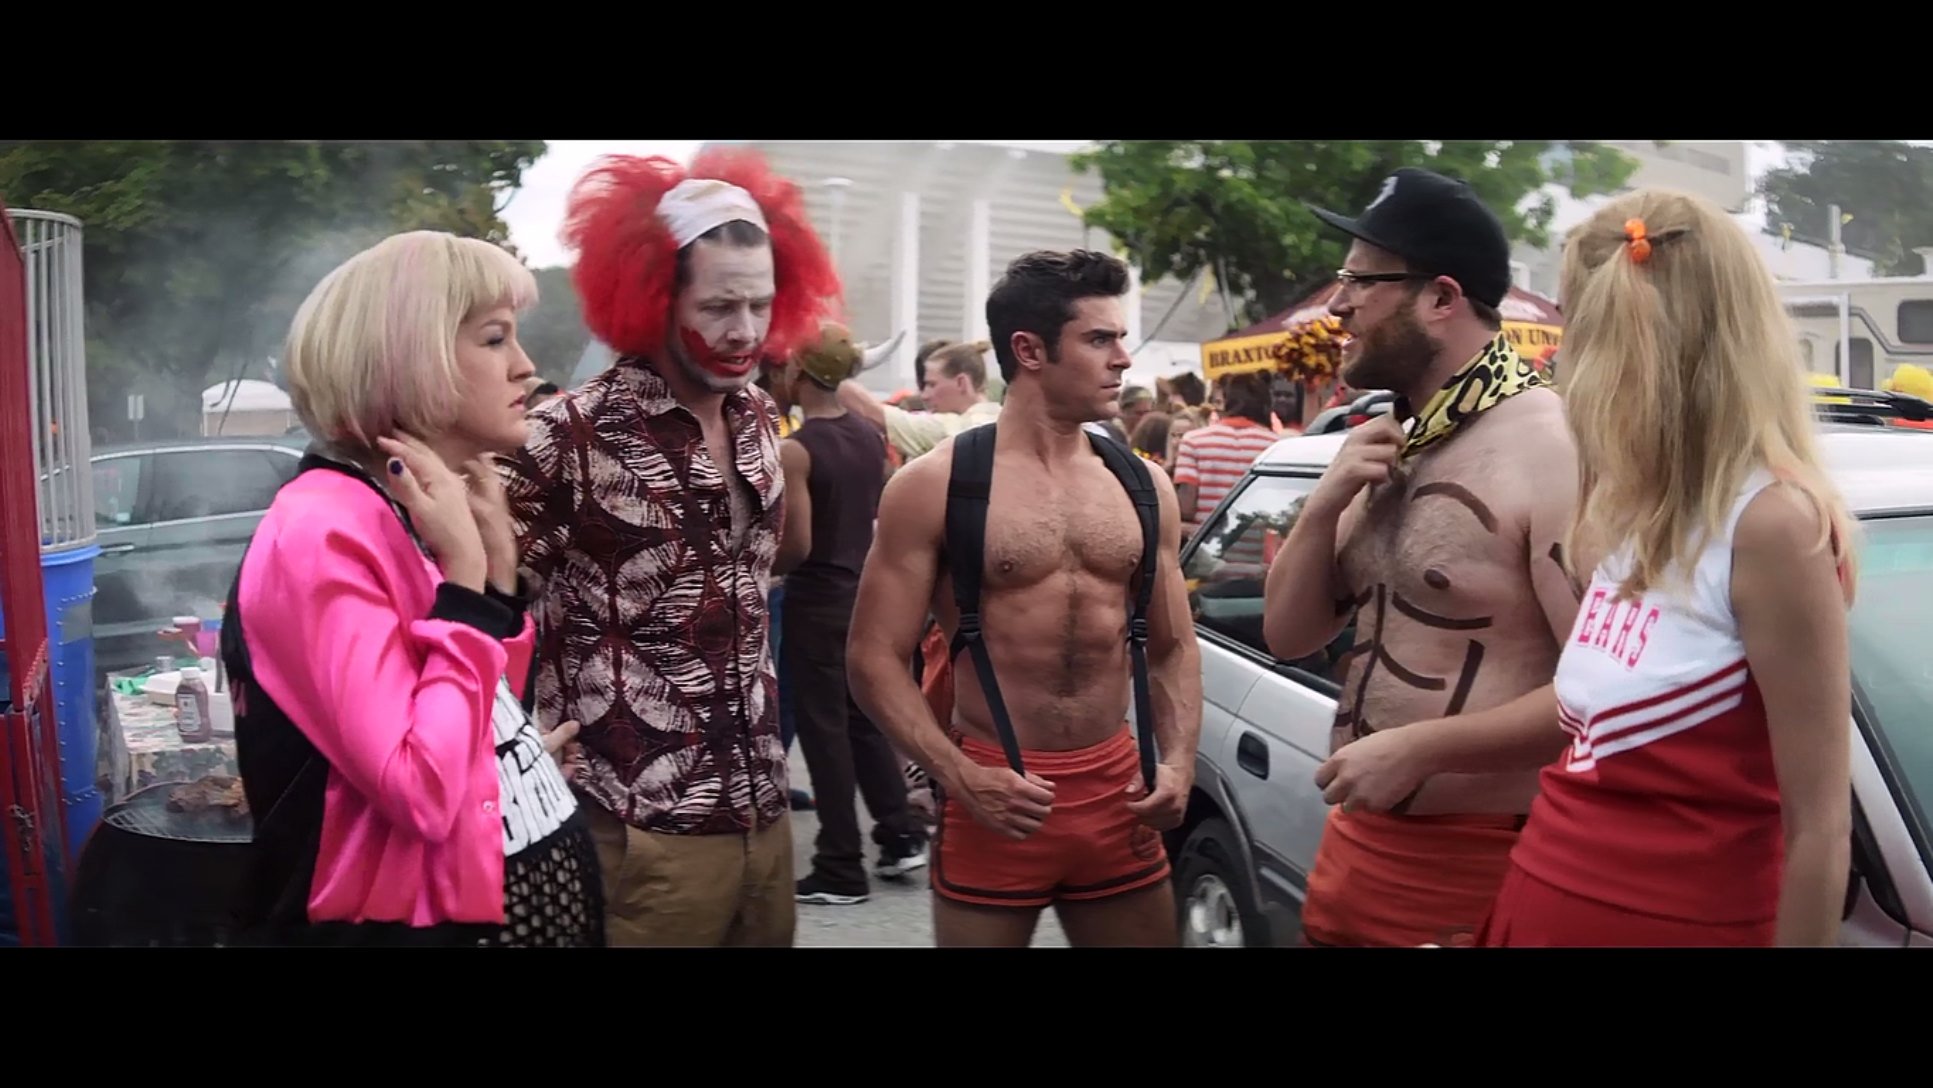 Watch  Zac Efron is looking sensational in this 'Bad Neighbours 2' trailer  - Attitude